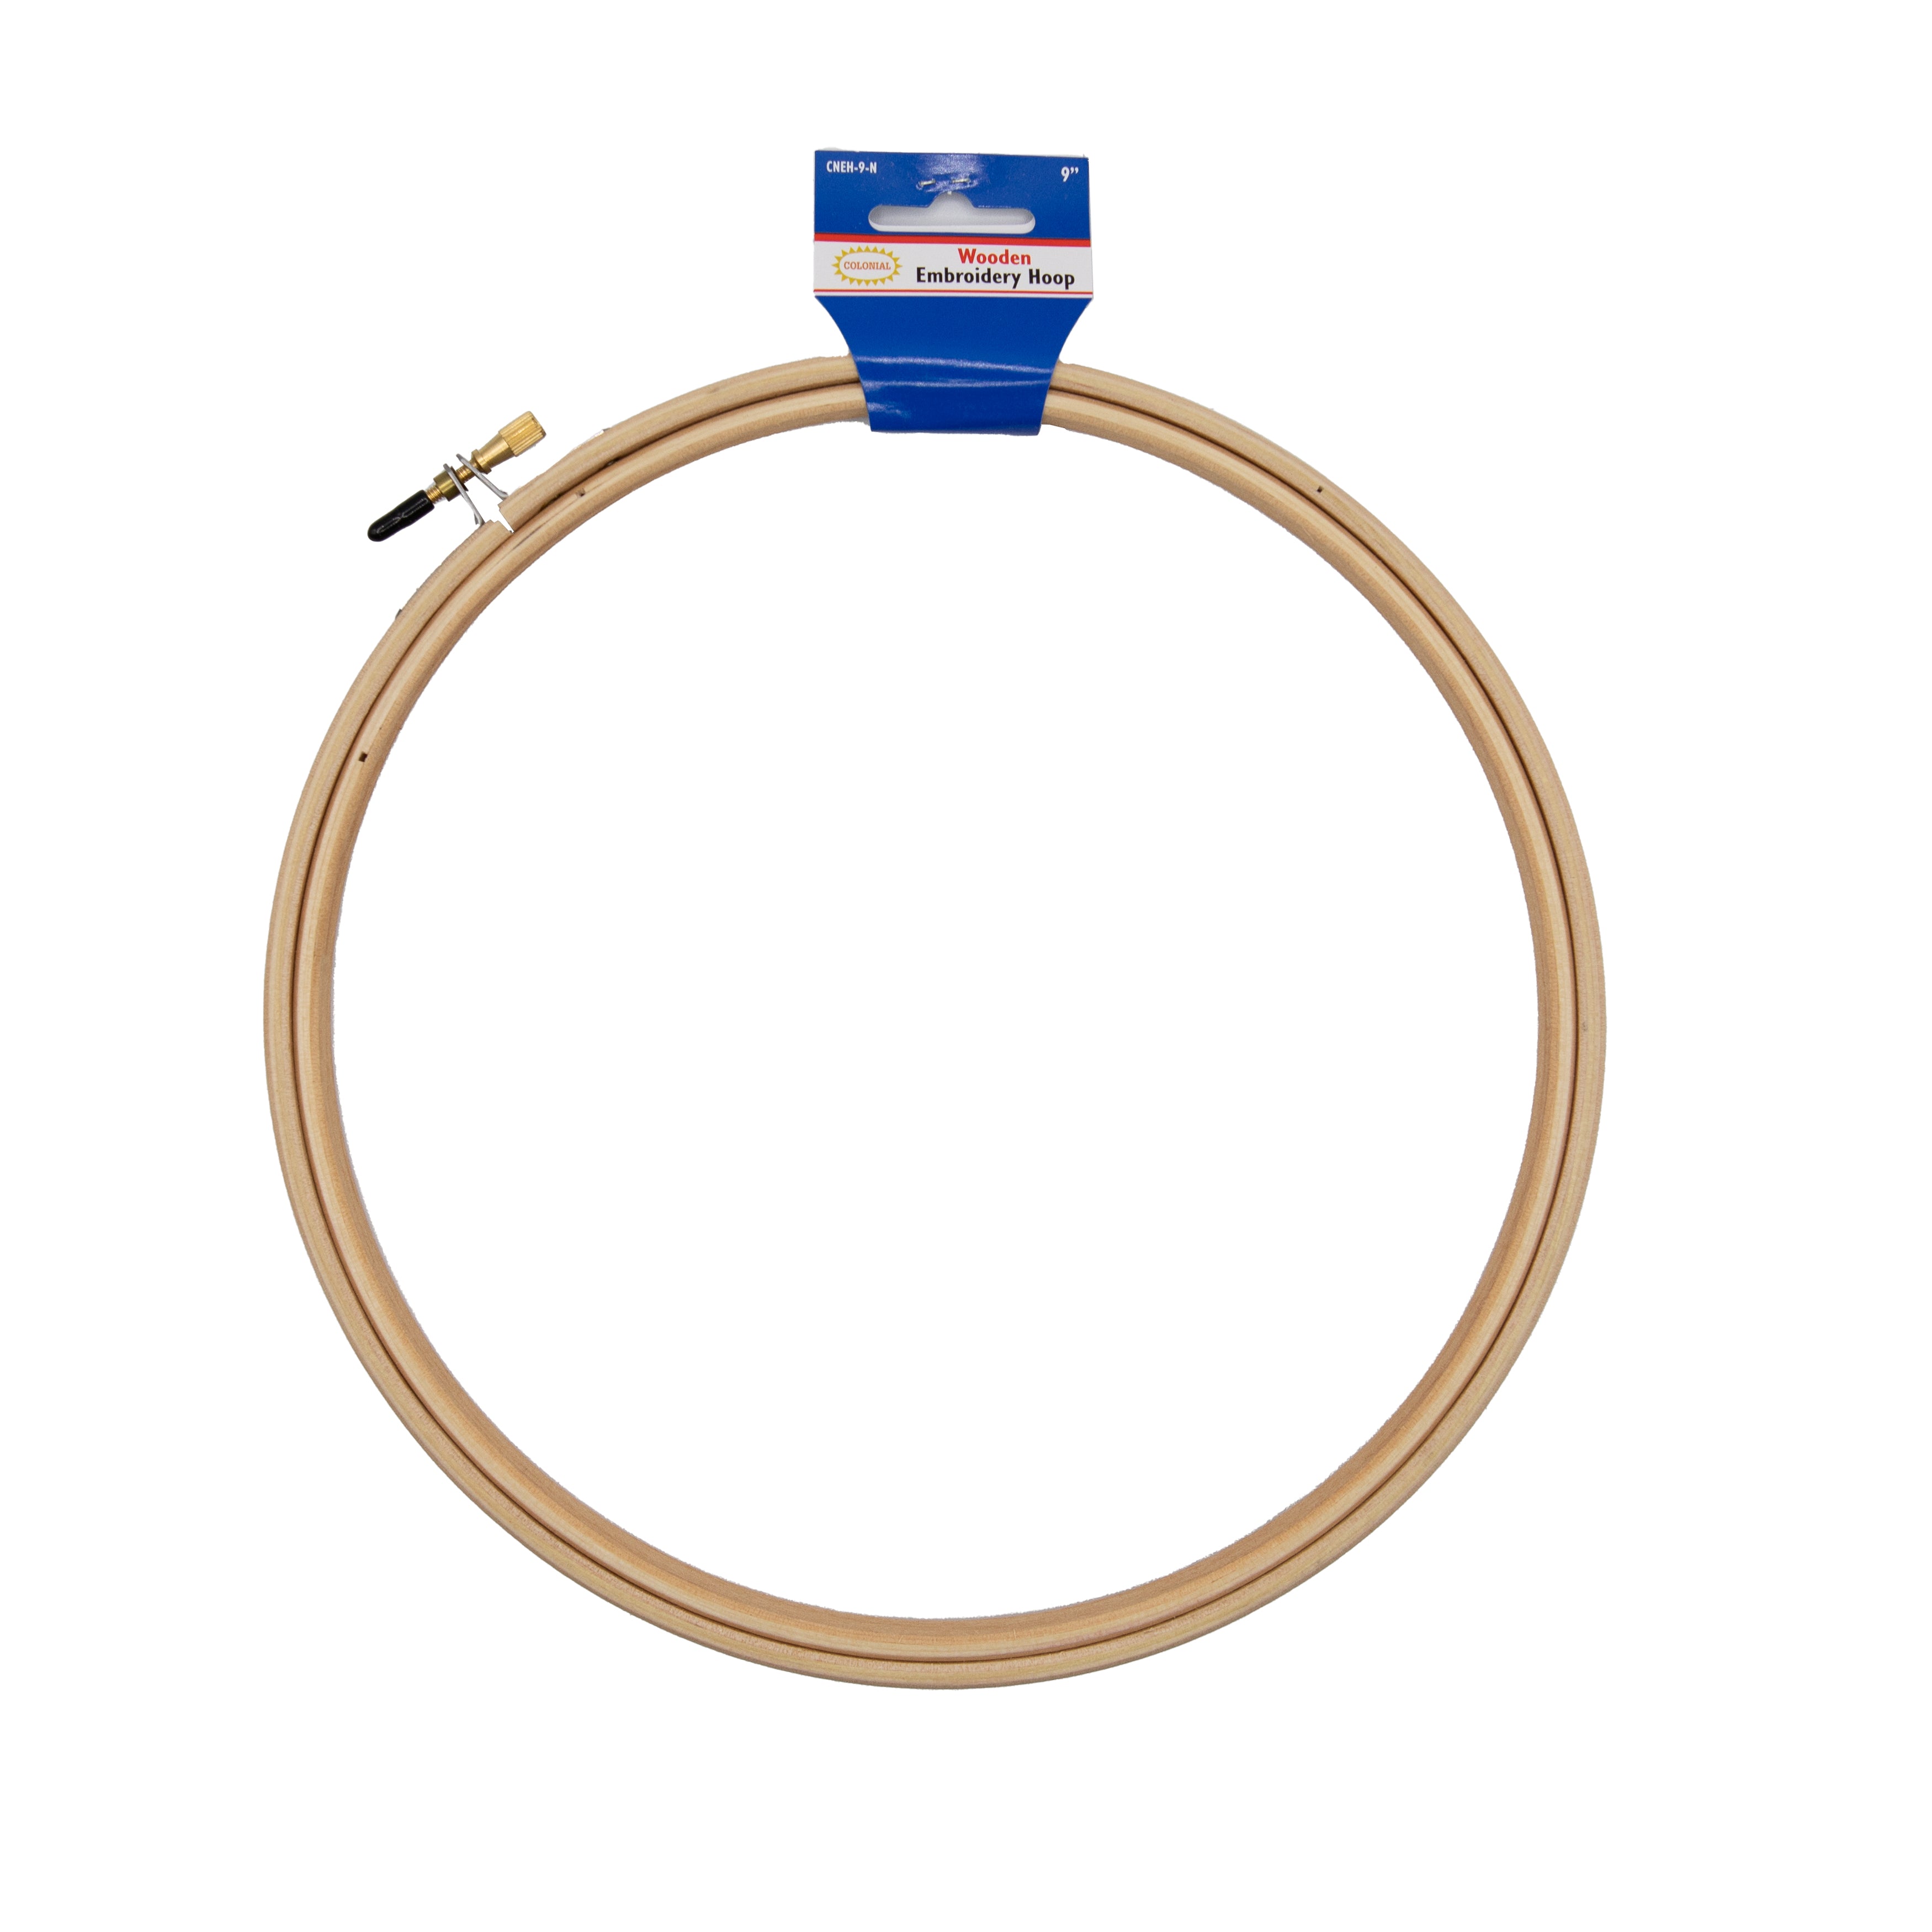 9 inch embroidery hoop with rounded edges